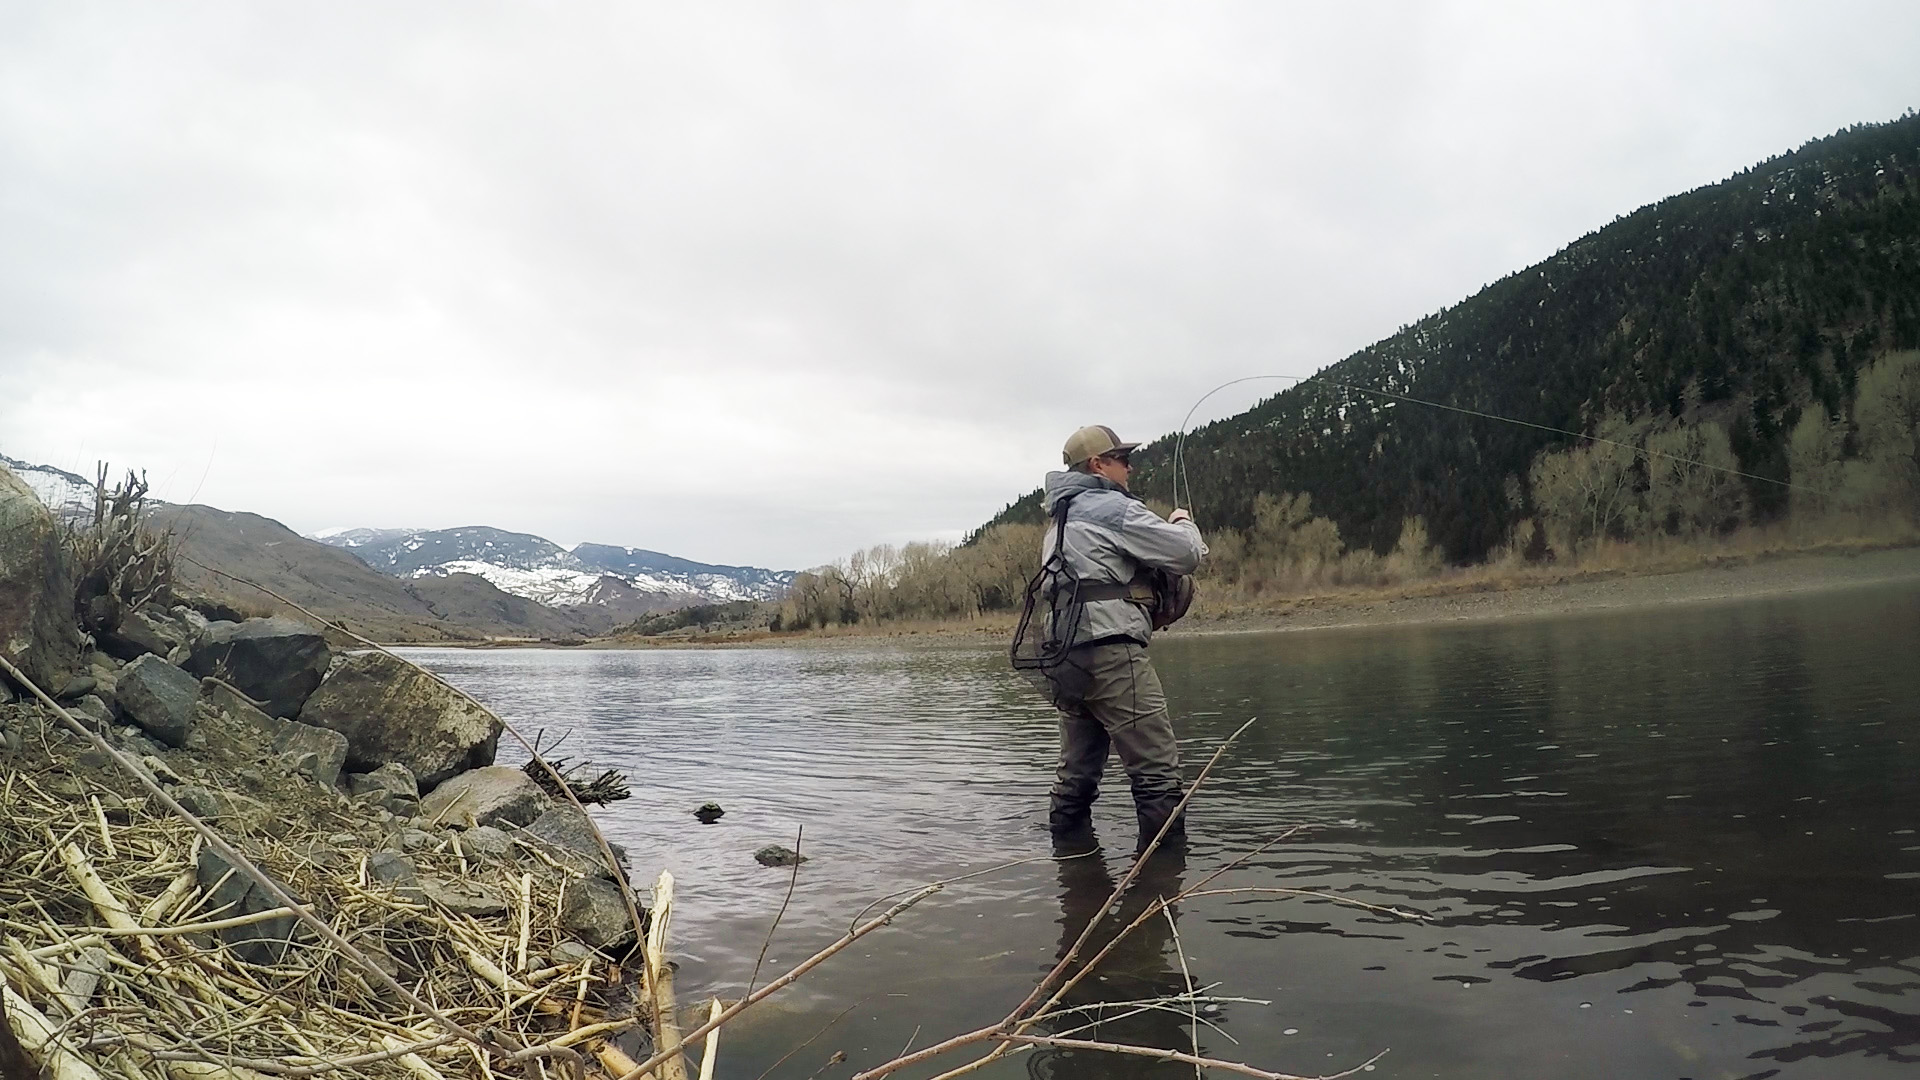 Wade Fishing the Yellowstone River - A Few Quick Tips - Sweetwater